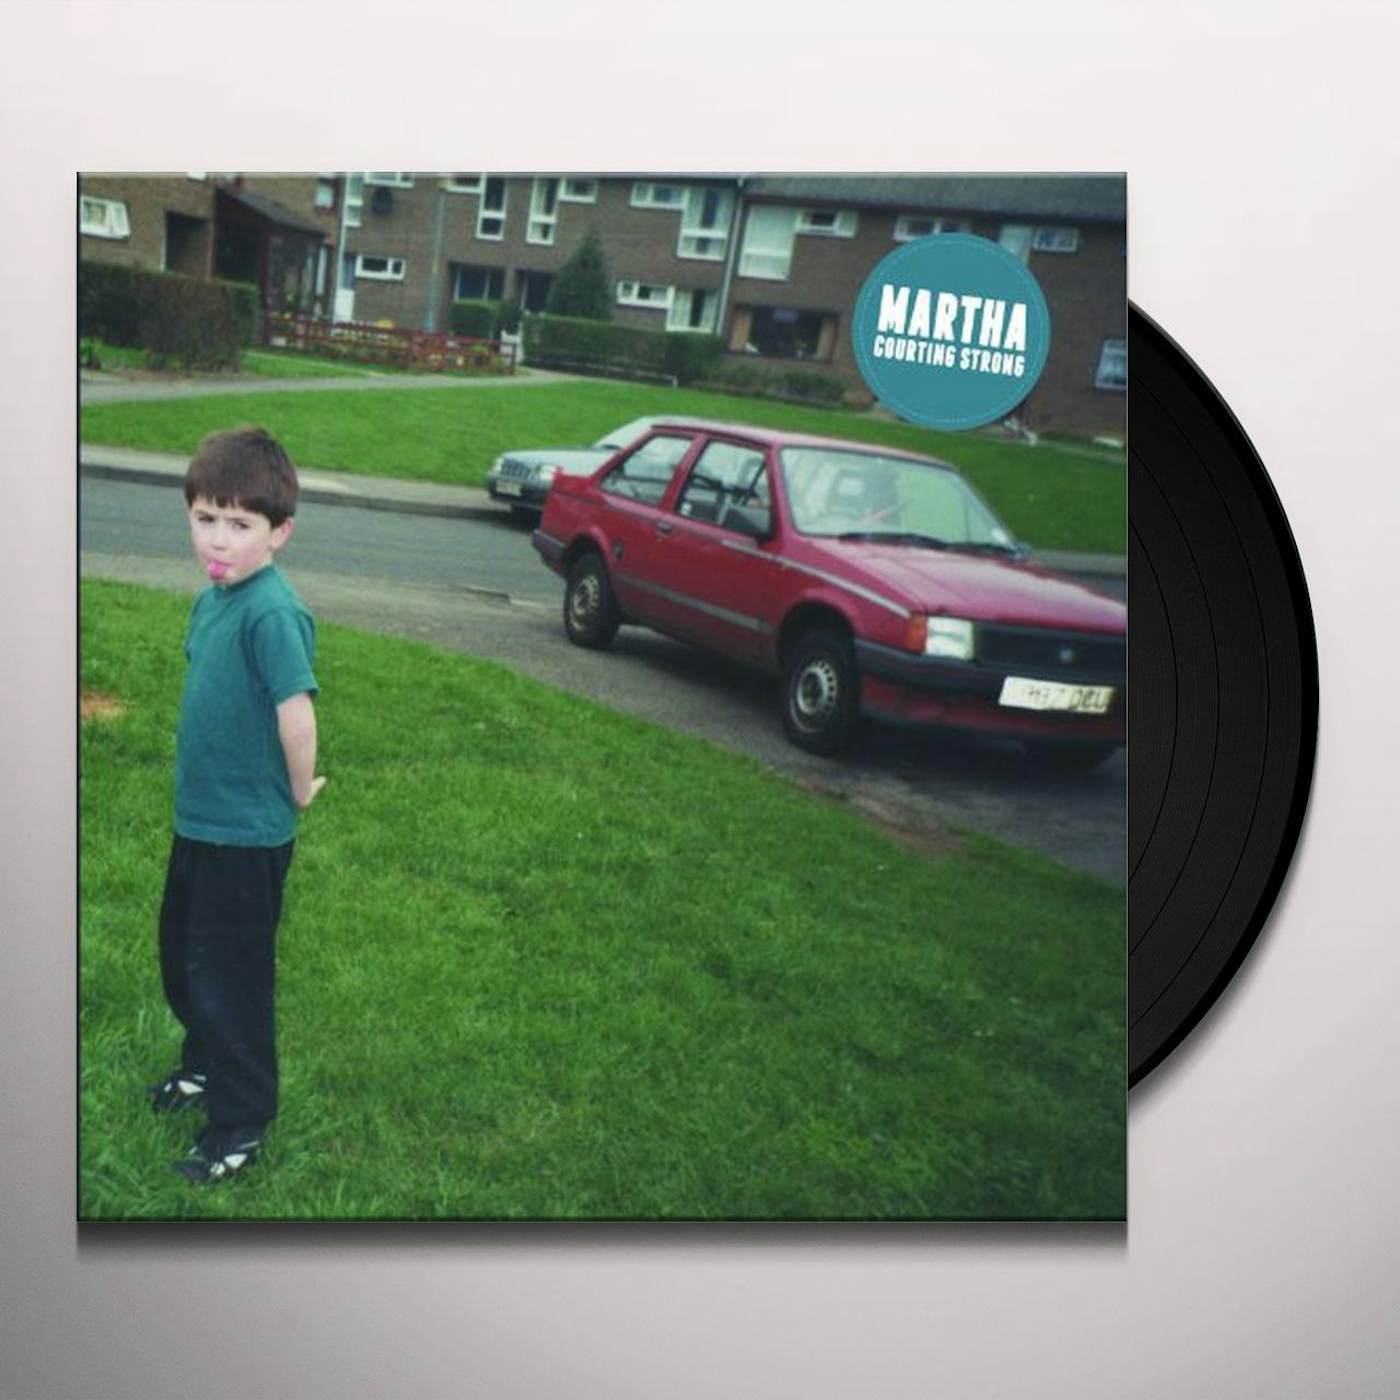 Martha COURTING STRONG Vinyl Record - UK Release